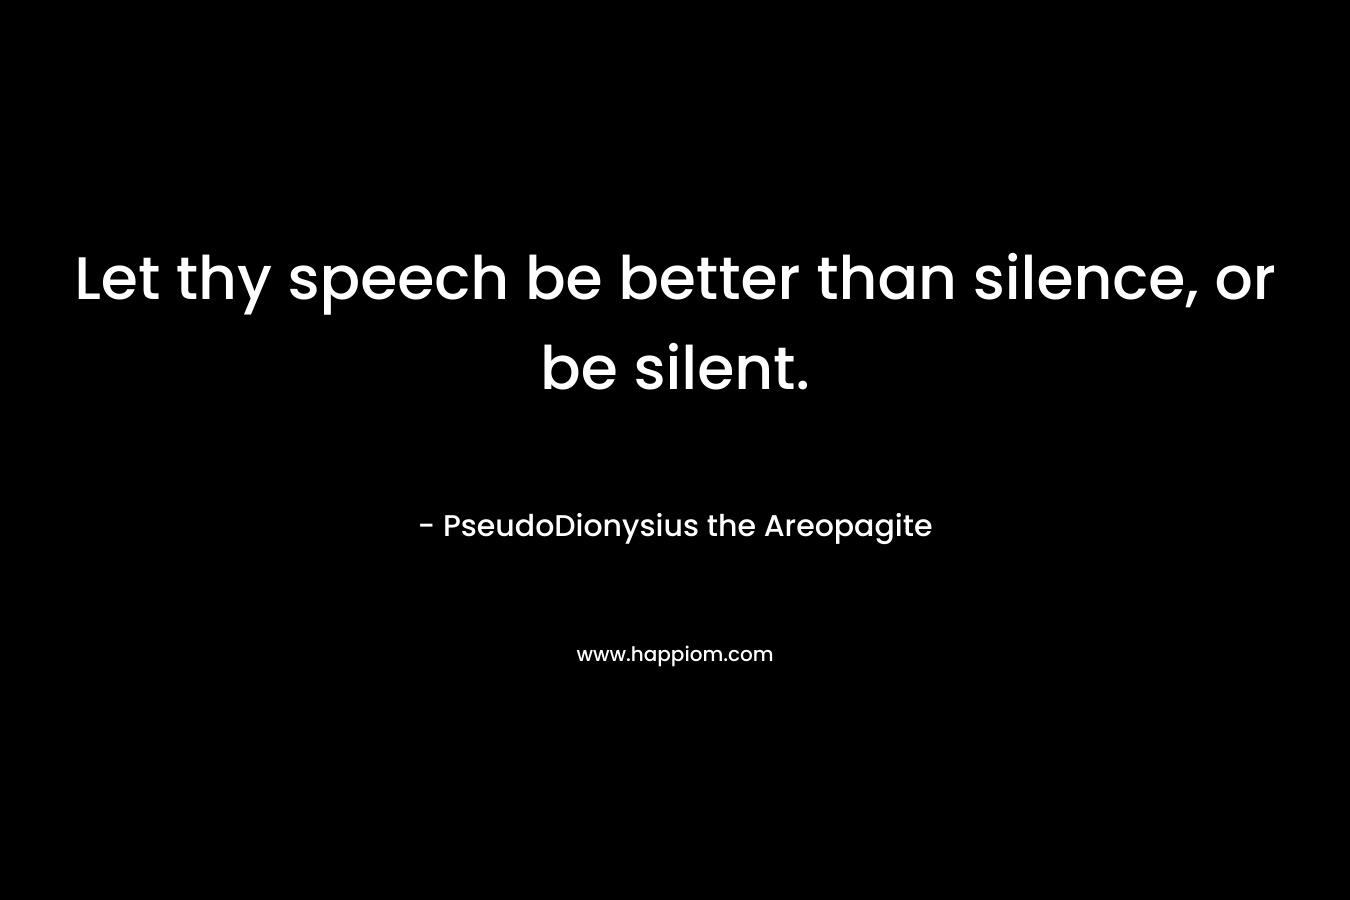 Let thy speech be better than silence, or be silent.